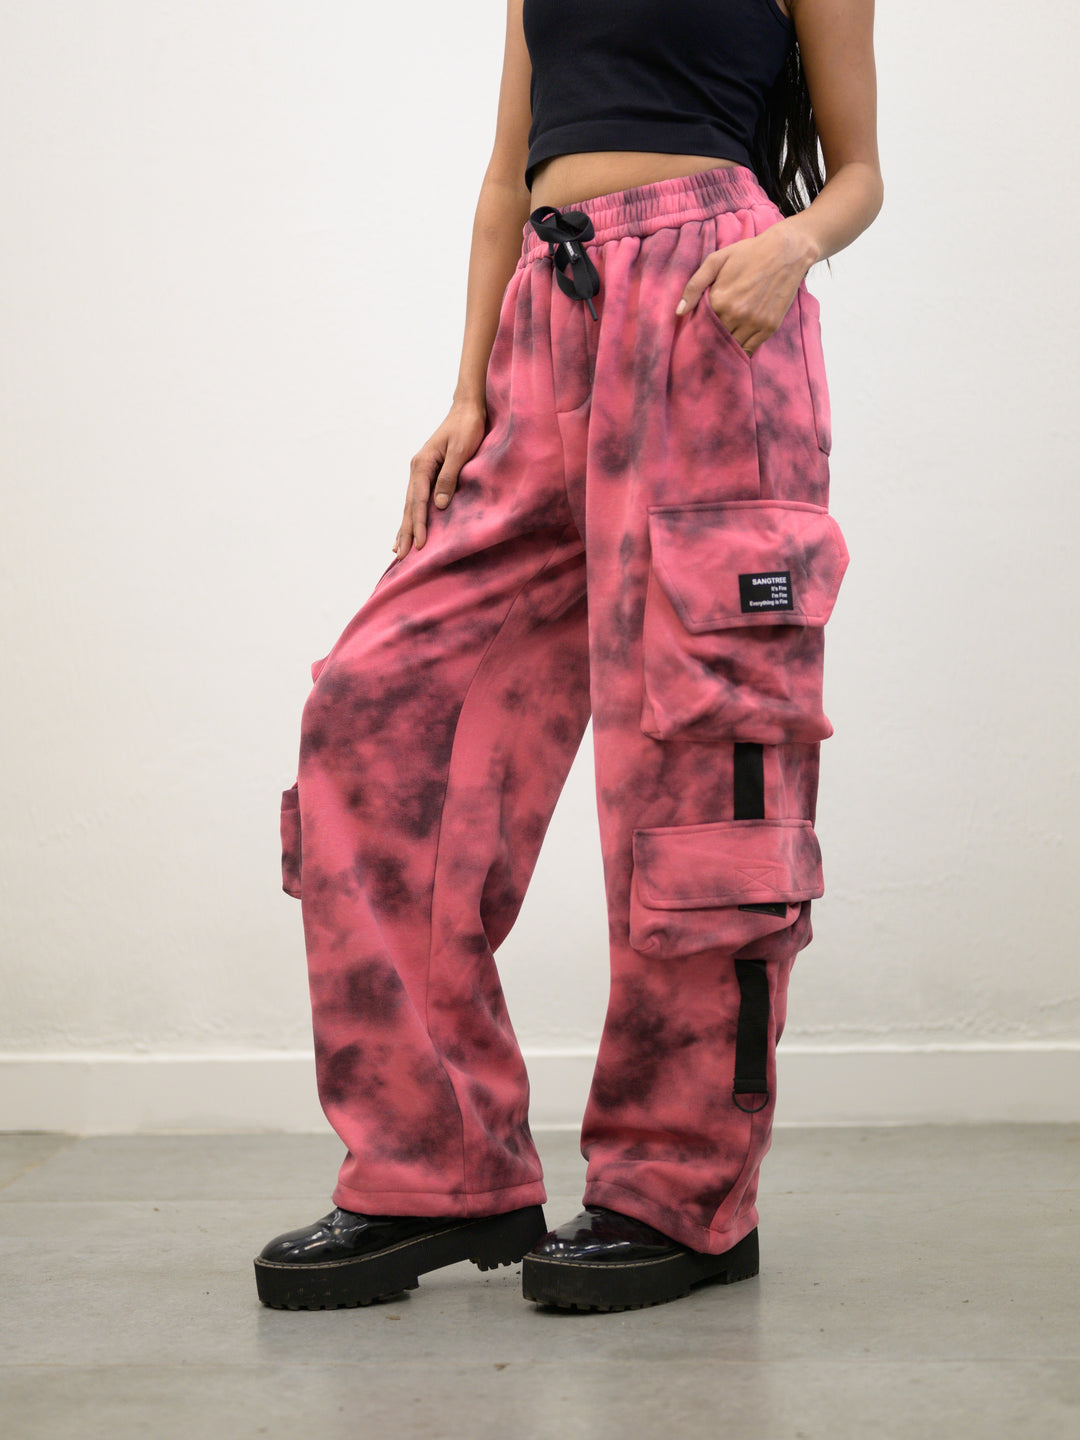 On-Trend Pink Tie & Dye Joggers – Shop Now!